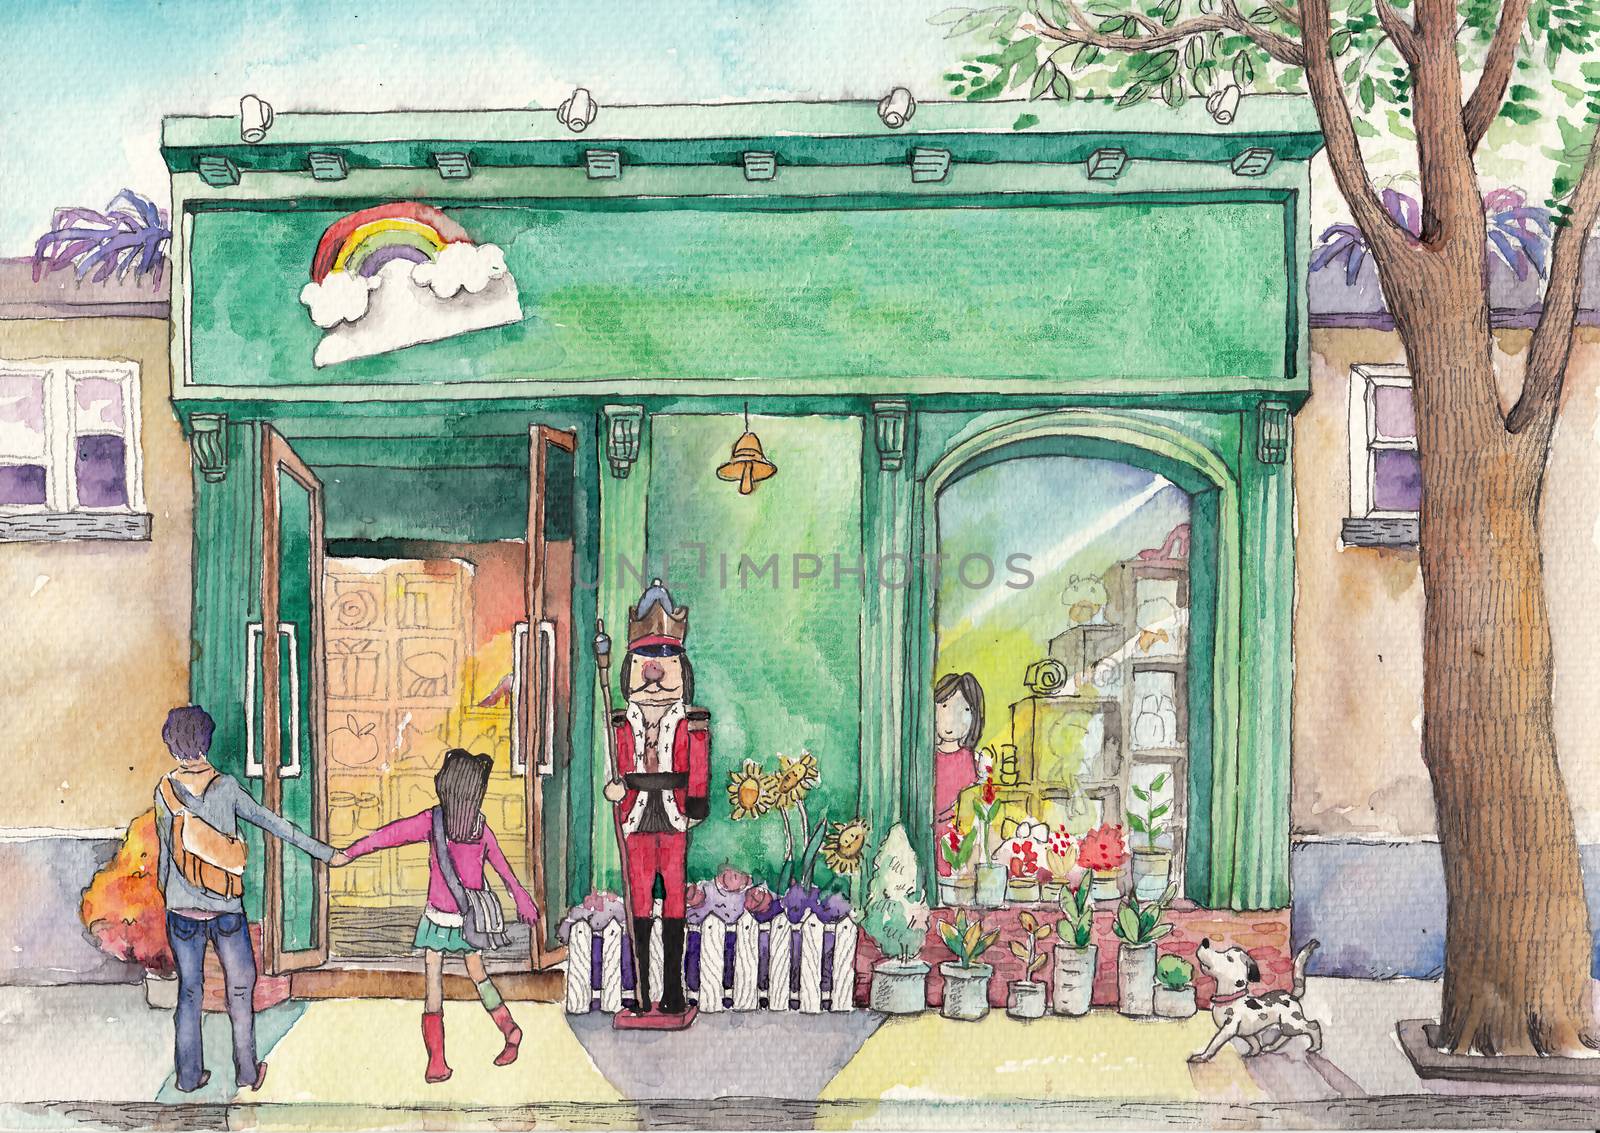 Watercolor High Definition Illustration: "Let's go." "No, Let me take a look." The Young Couple in front of a Street Shop. Fantastic Cartoon Style Scene Wallpaper Background Design with Story.